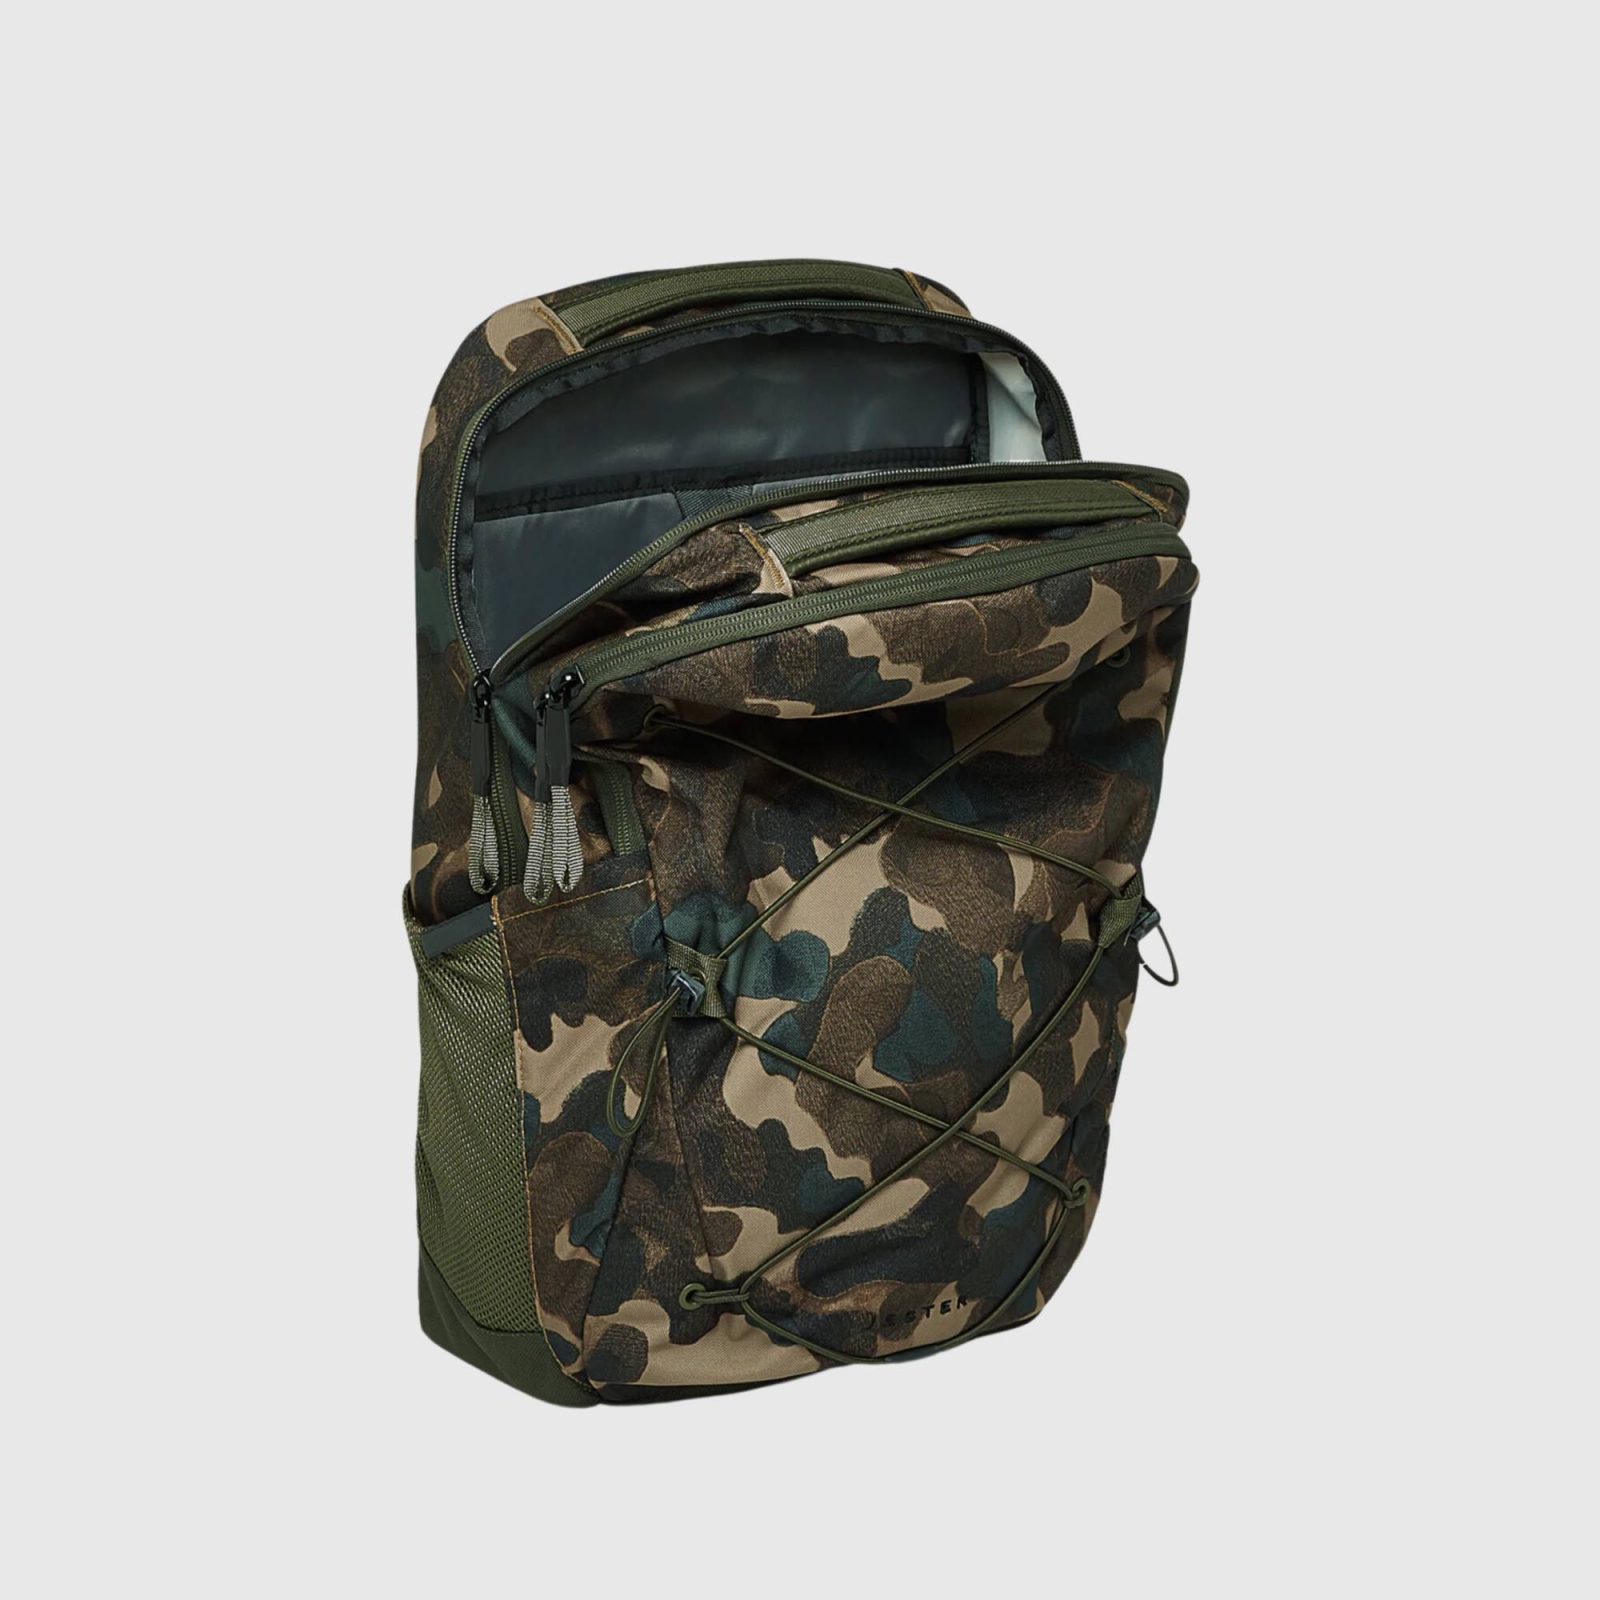 THE NORTH FACE JESTER BAG